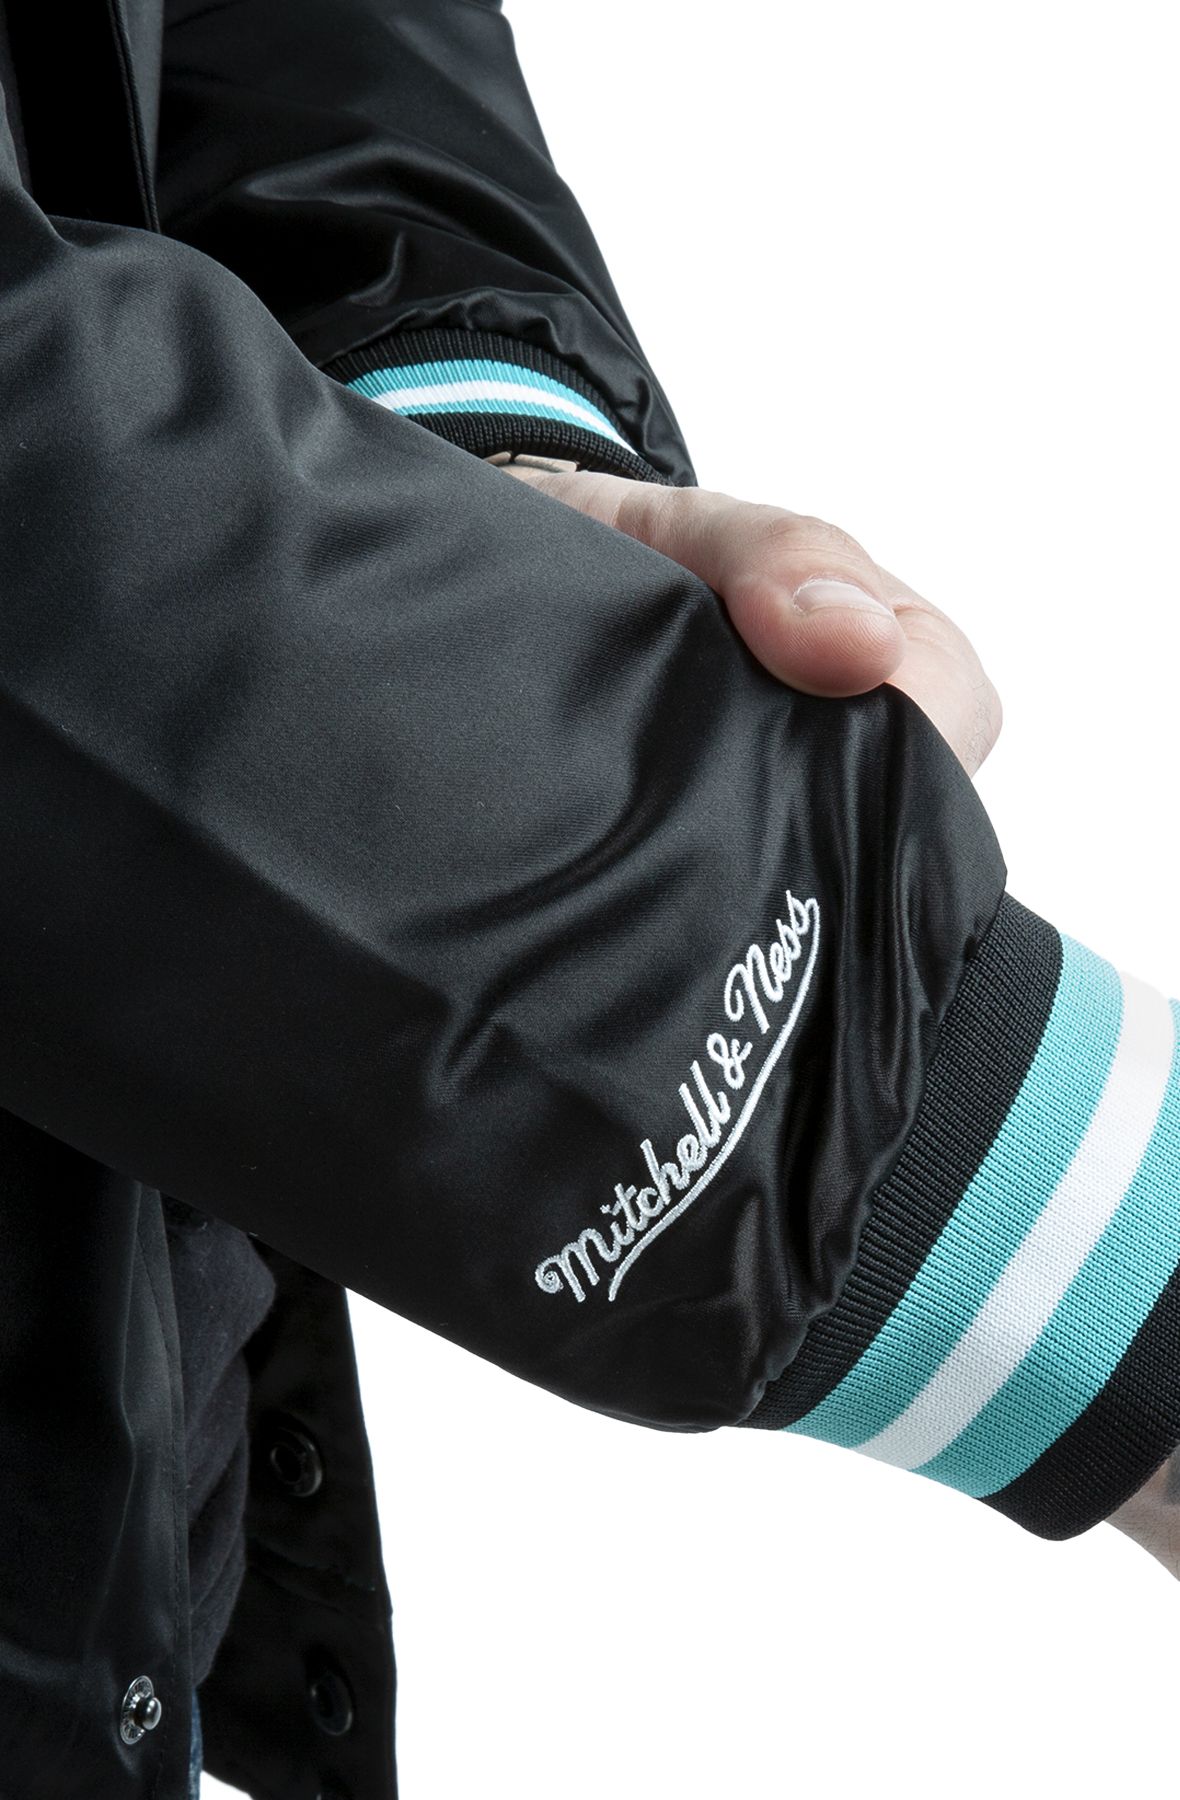 Mitchell and Ness Lightweight Satin Jacket Vancouver Grizzlies Black/Teal